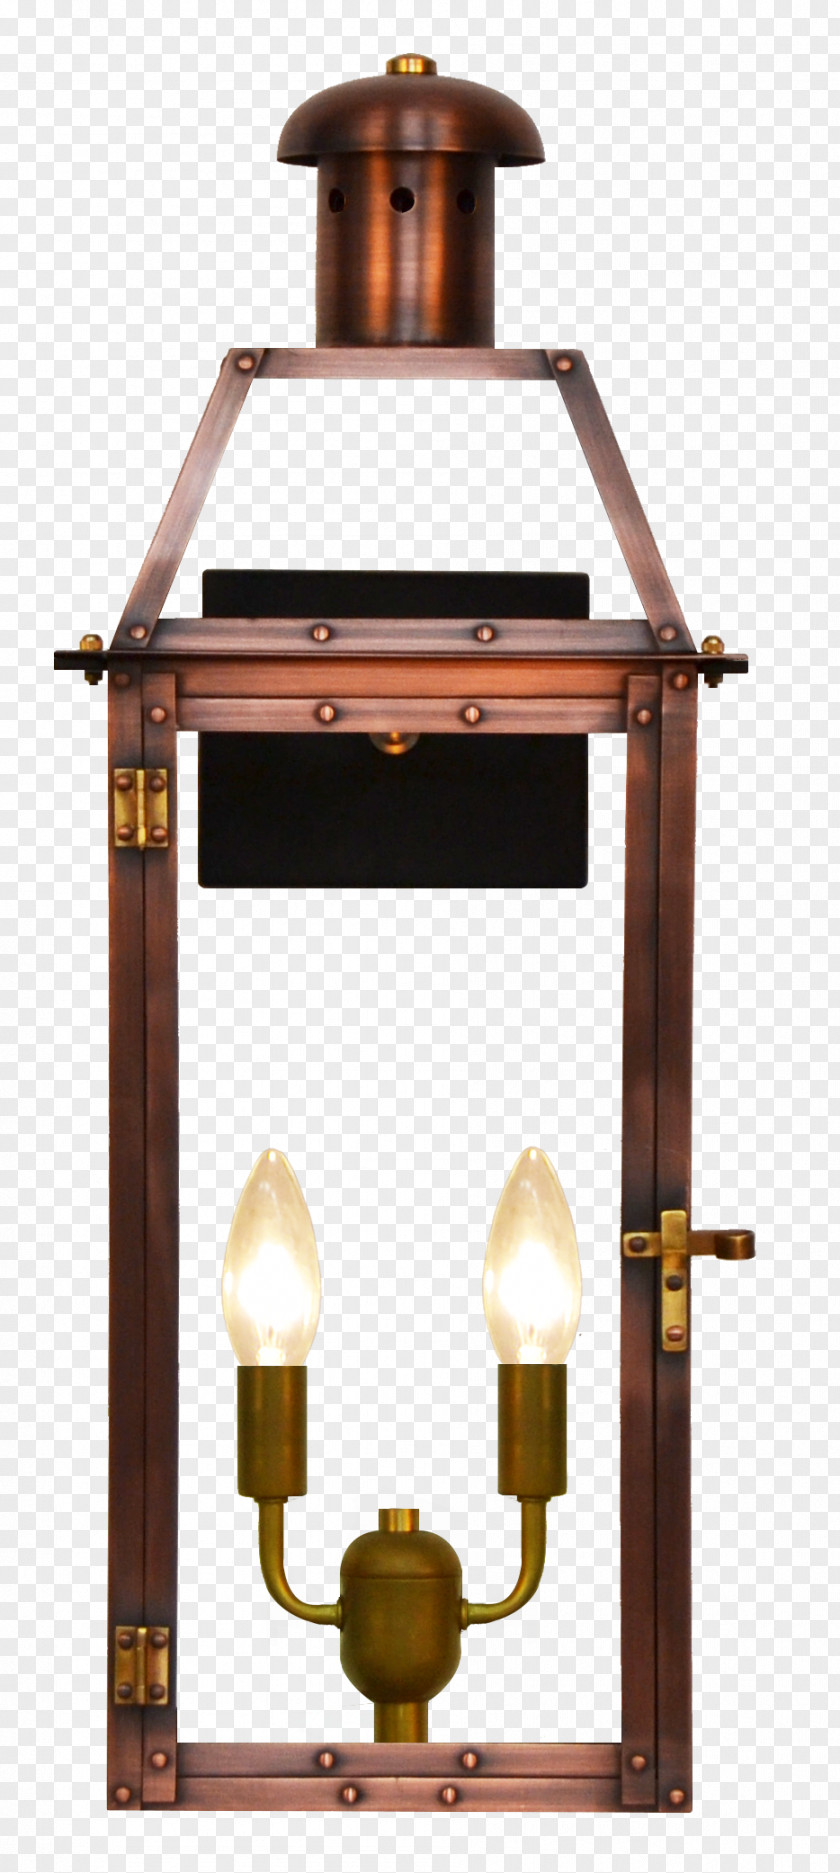 Light Gas Lighting Lantern Natural Coppersmith PNG